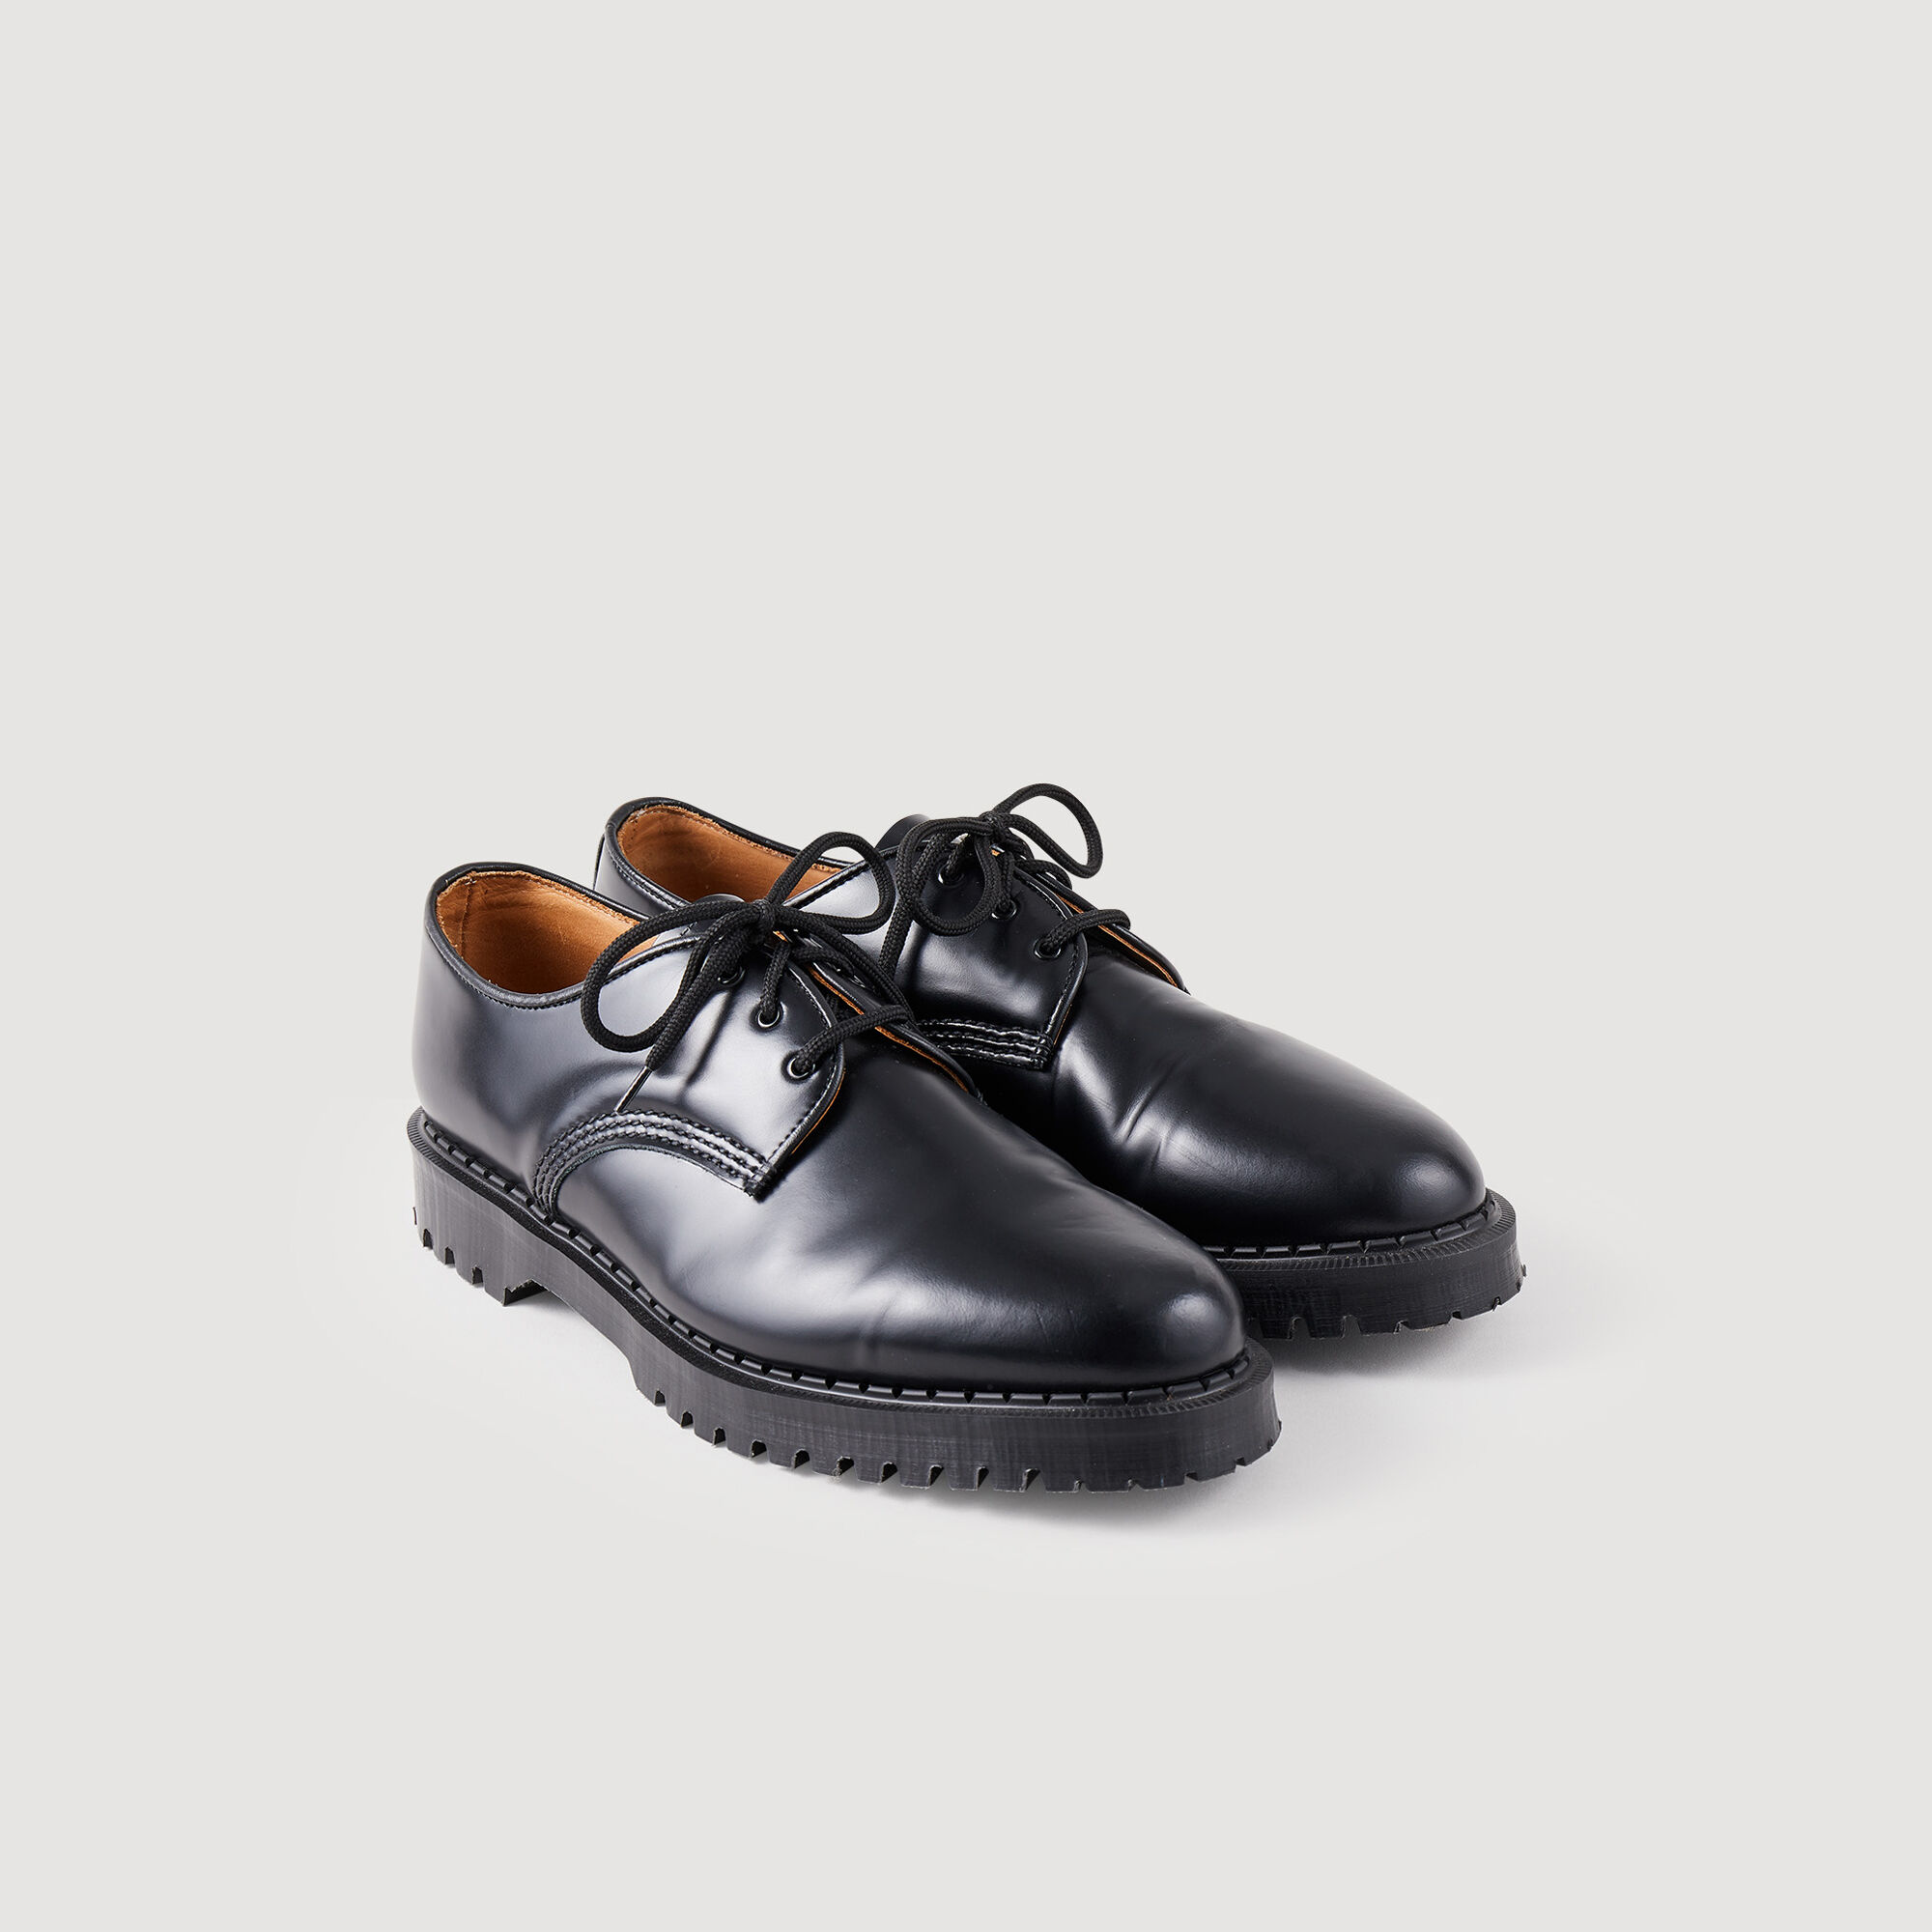 Derby shoe with studs Select a size and Login to add to Wish list